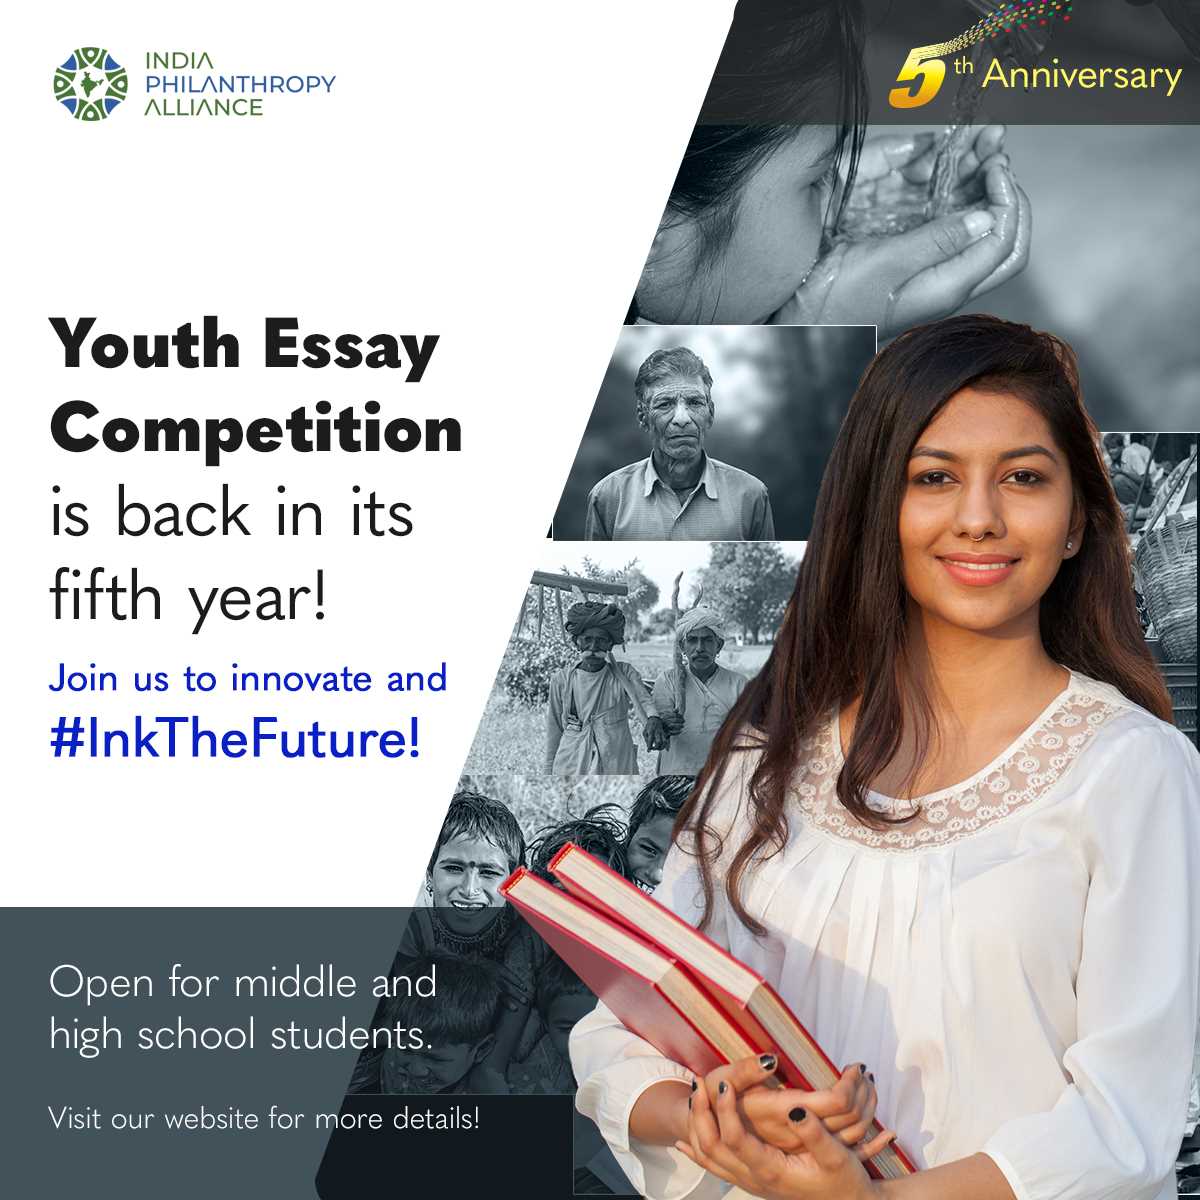 The India Philanthropy Alliance Announces Its 5th Annual Youth Essay Competition